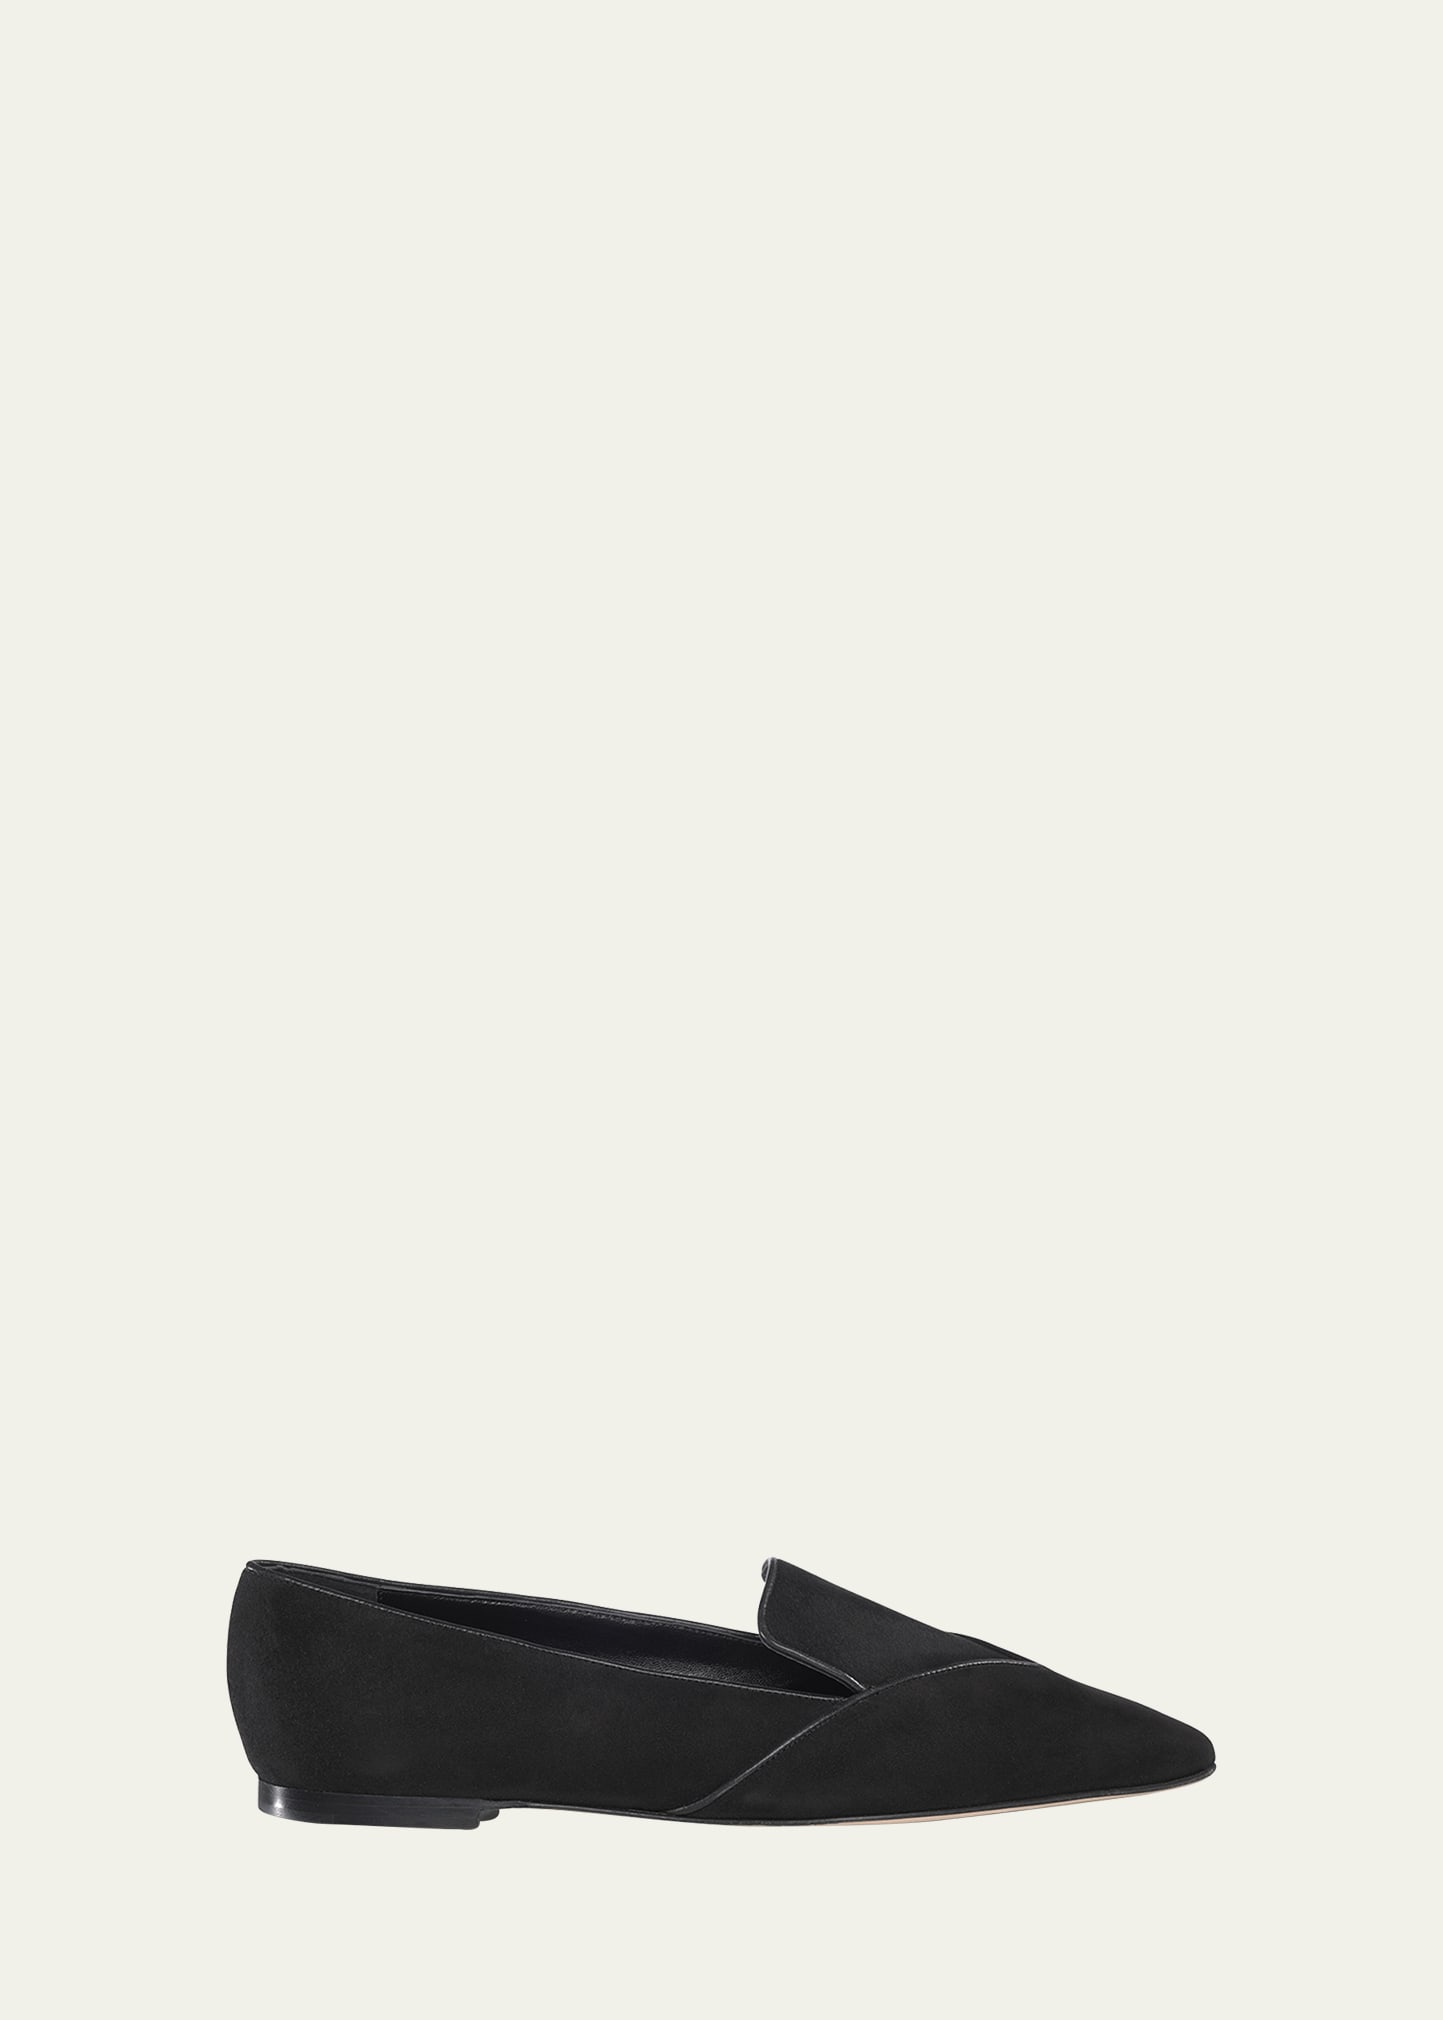 Marion Parke Raquel Suede Flat Loafers In Black